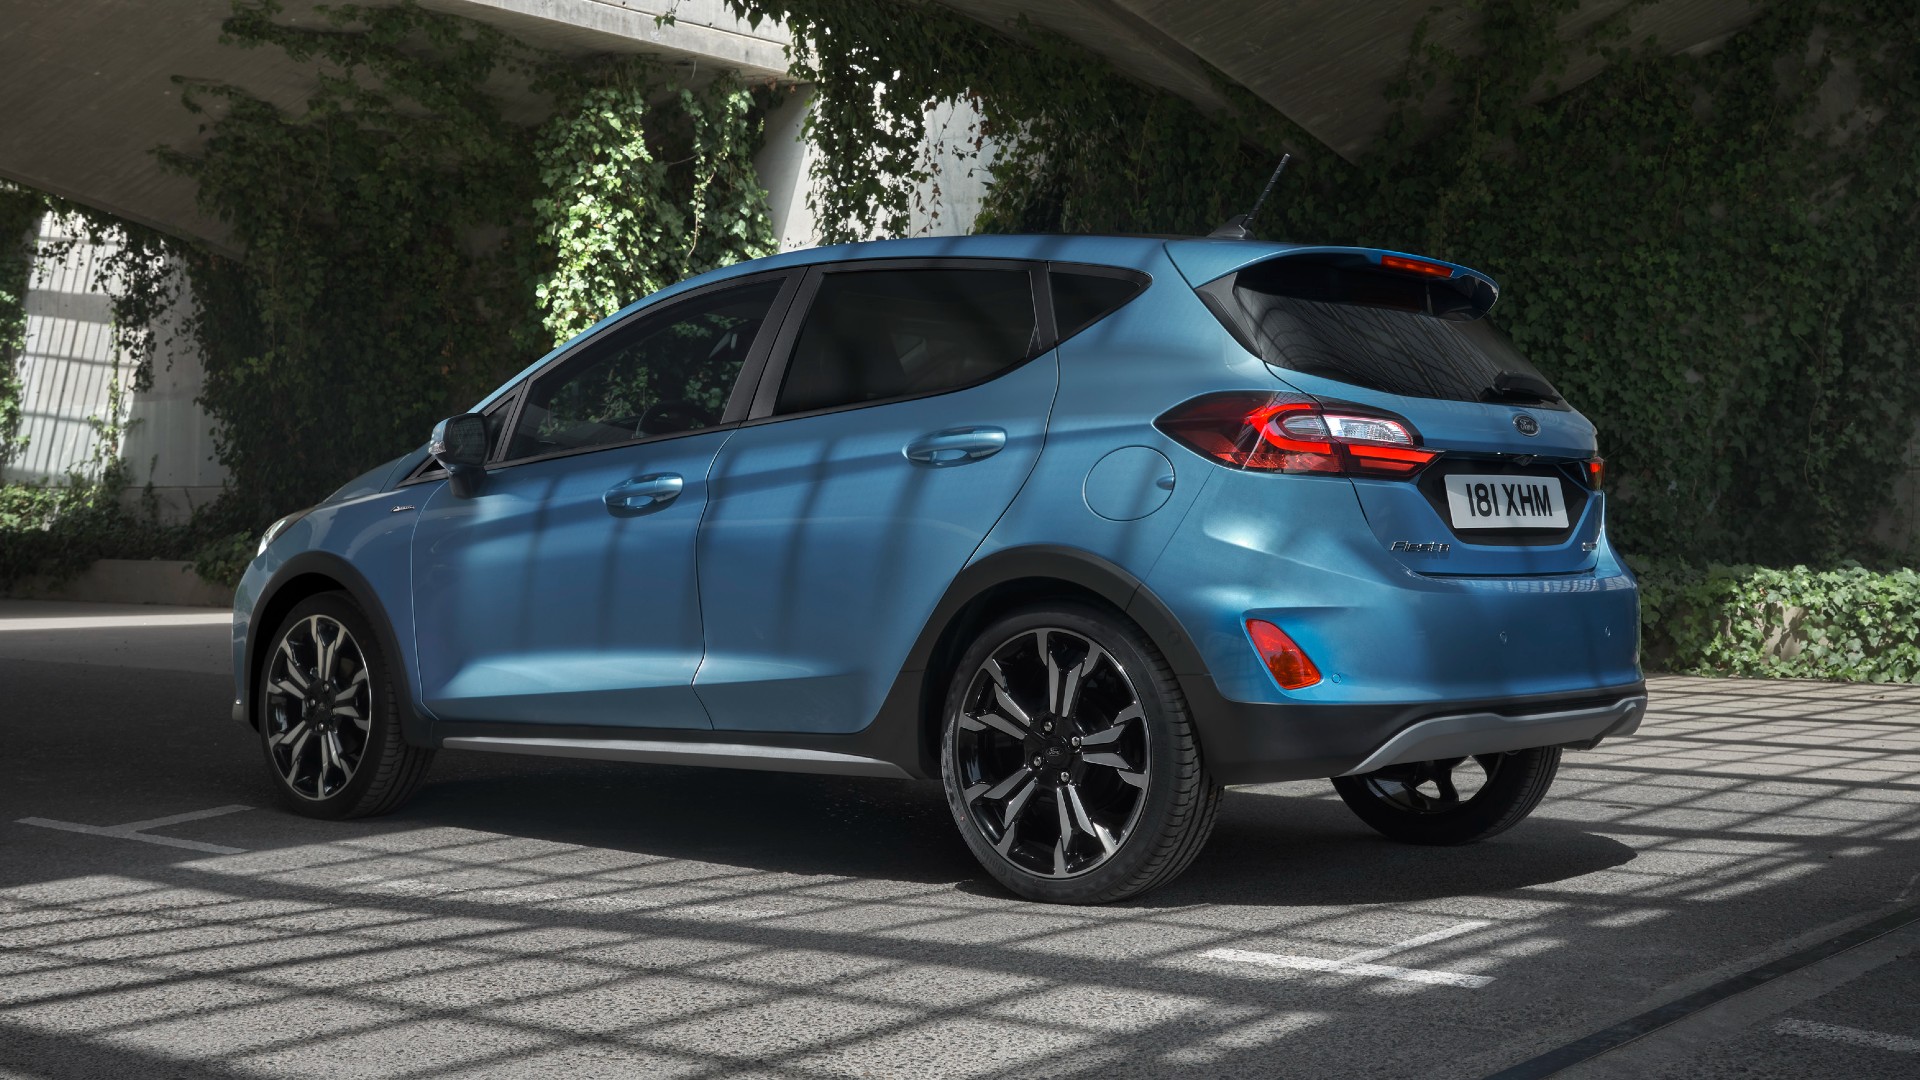 2022 Ford Fiesta debuts with new design, enhanced features and more power